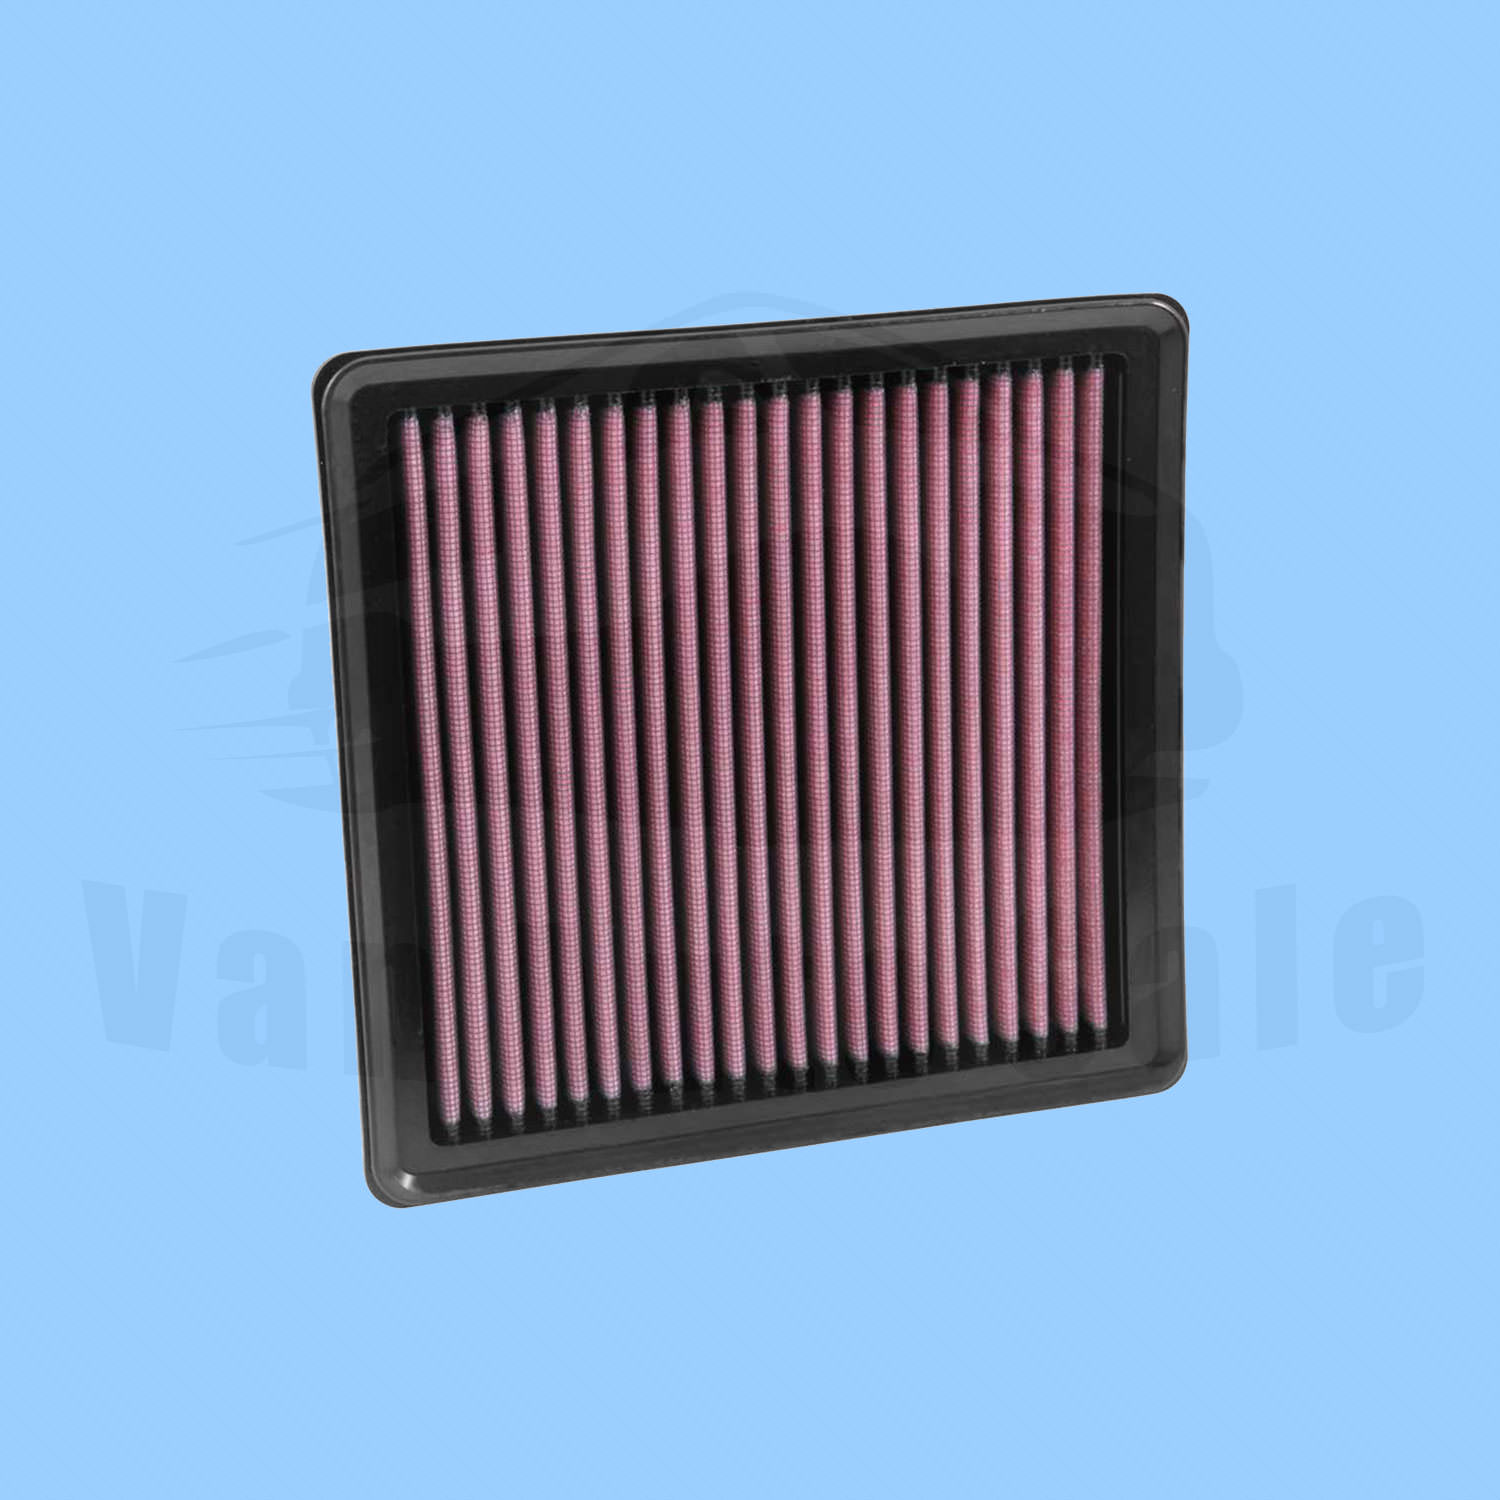 Replacement Air Filter K&N for Jeep Grand Cherokee 2014-2019 | eBay 2019 Jeep Grand Cherokee Air Filter Replacement